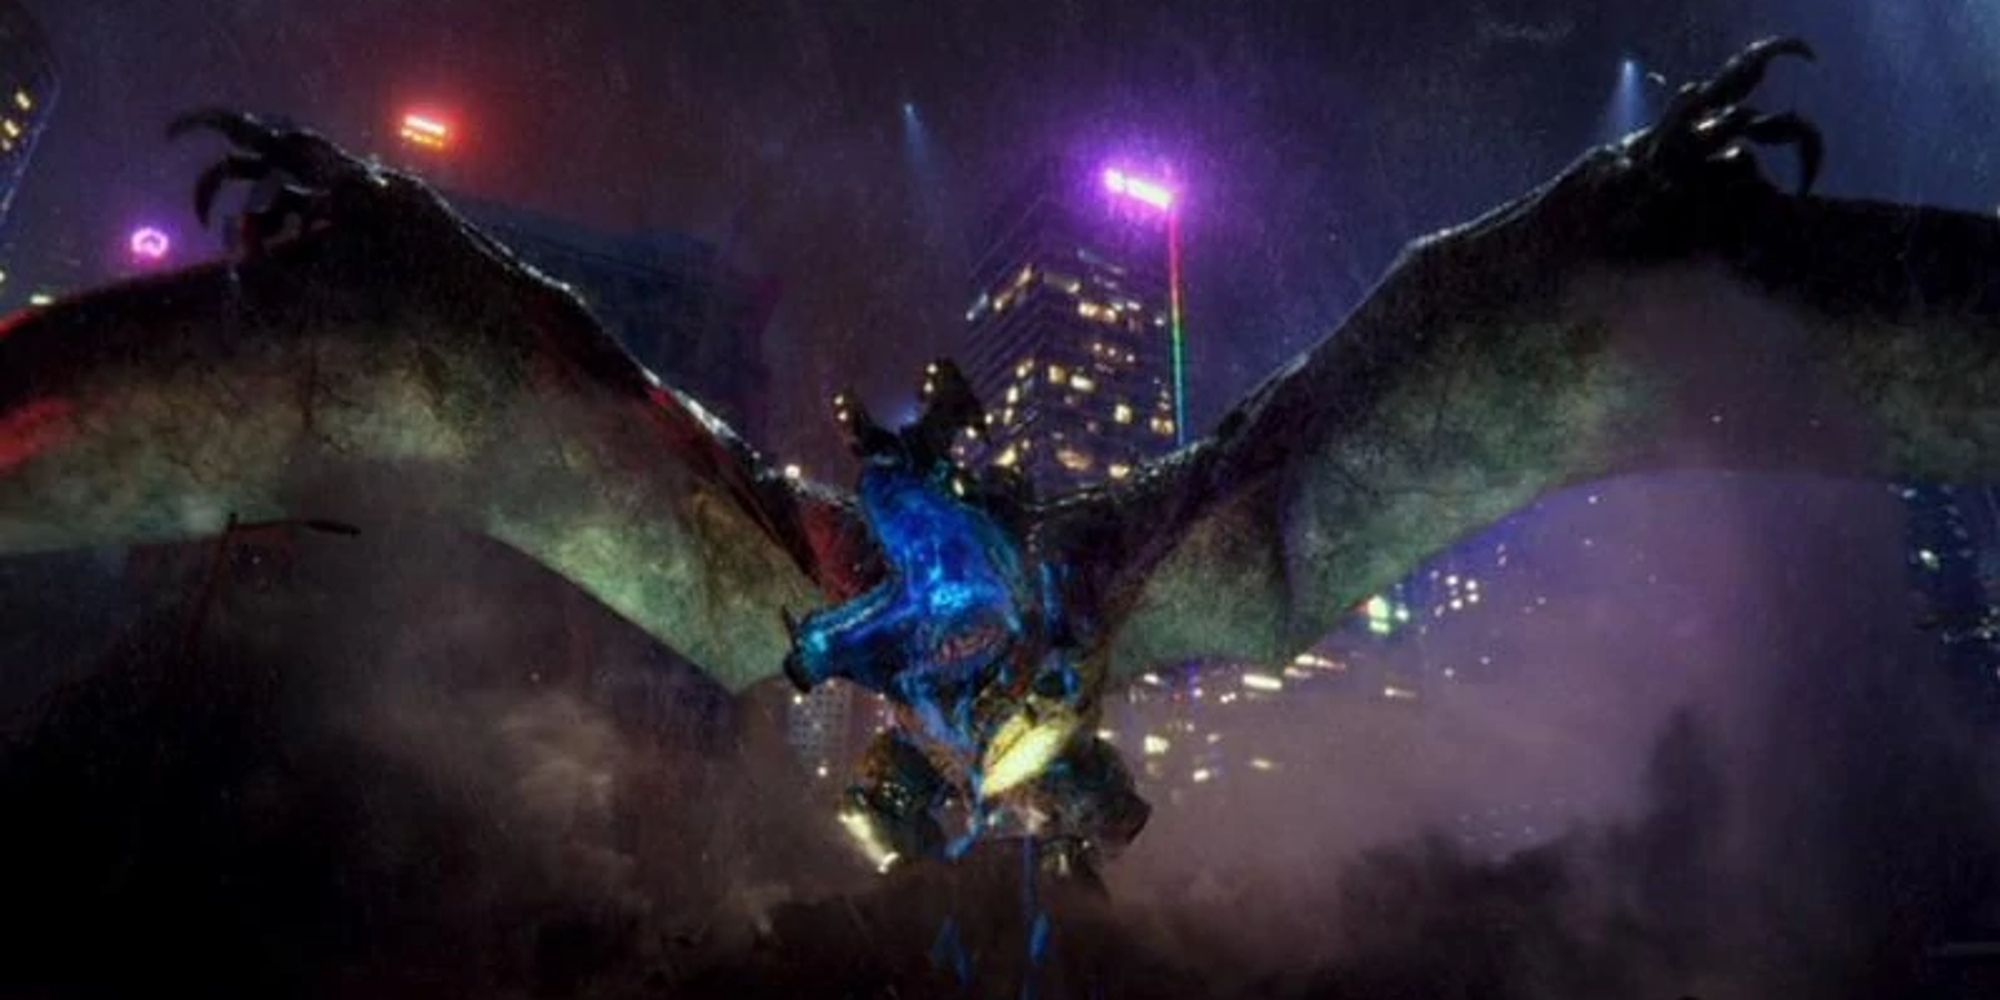 A winged beast from Pacific Rim